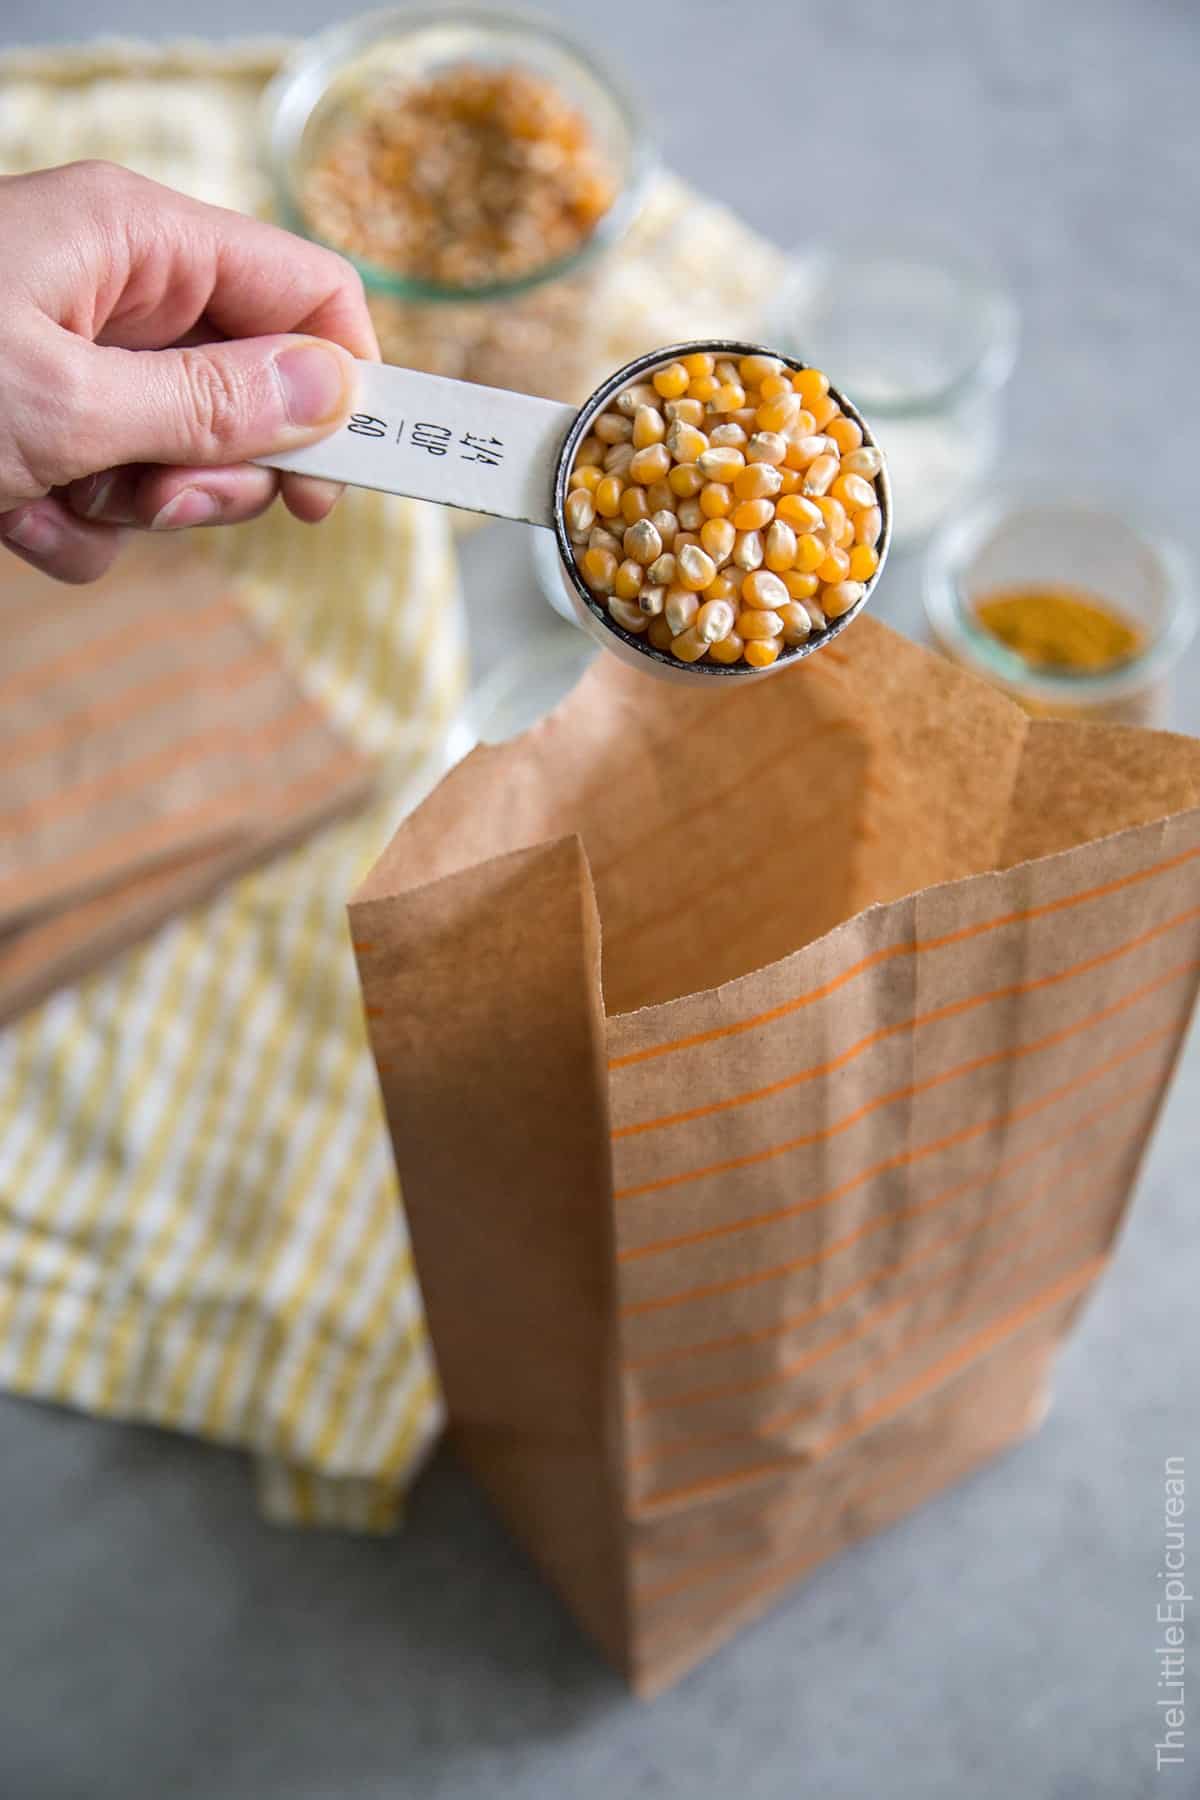 Homemade Microwave Popcorn (with flavor mix-ins!)